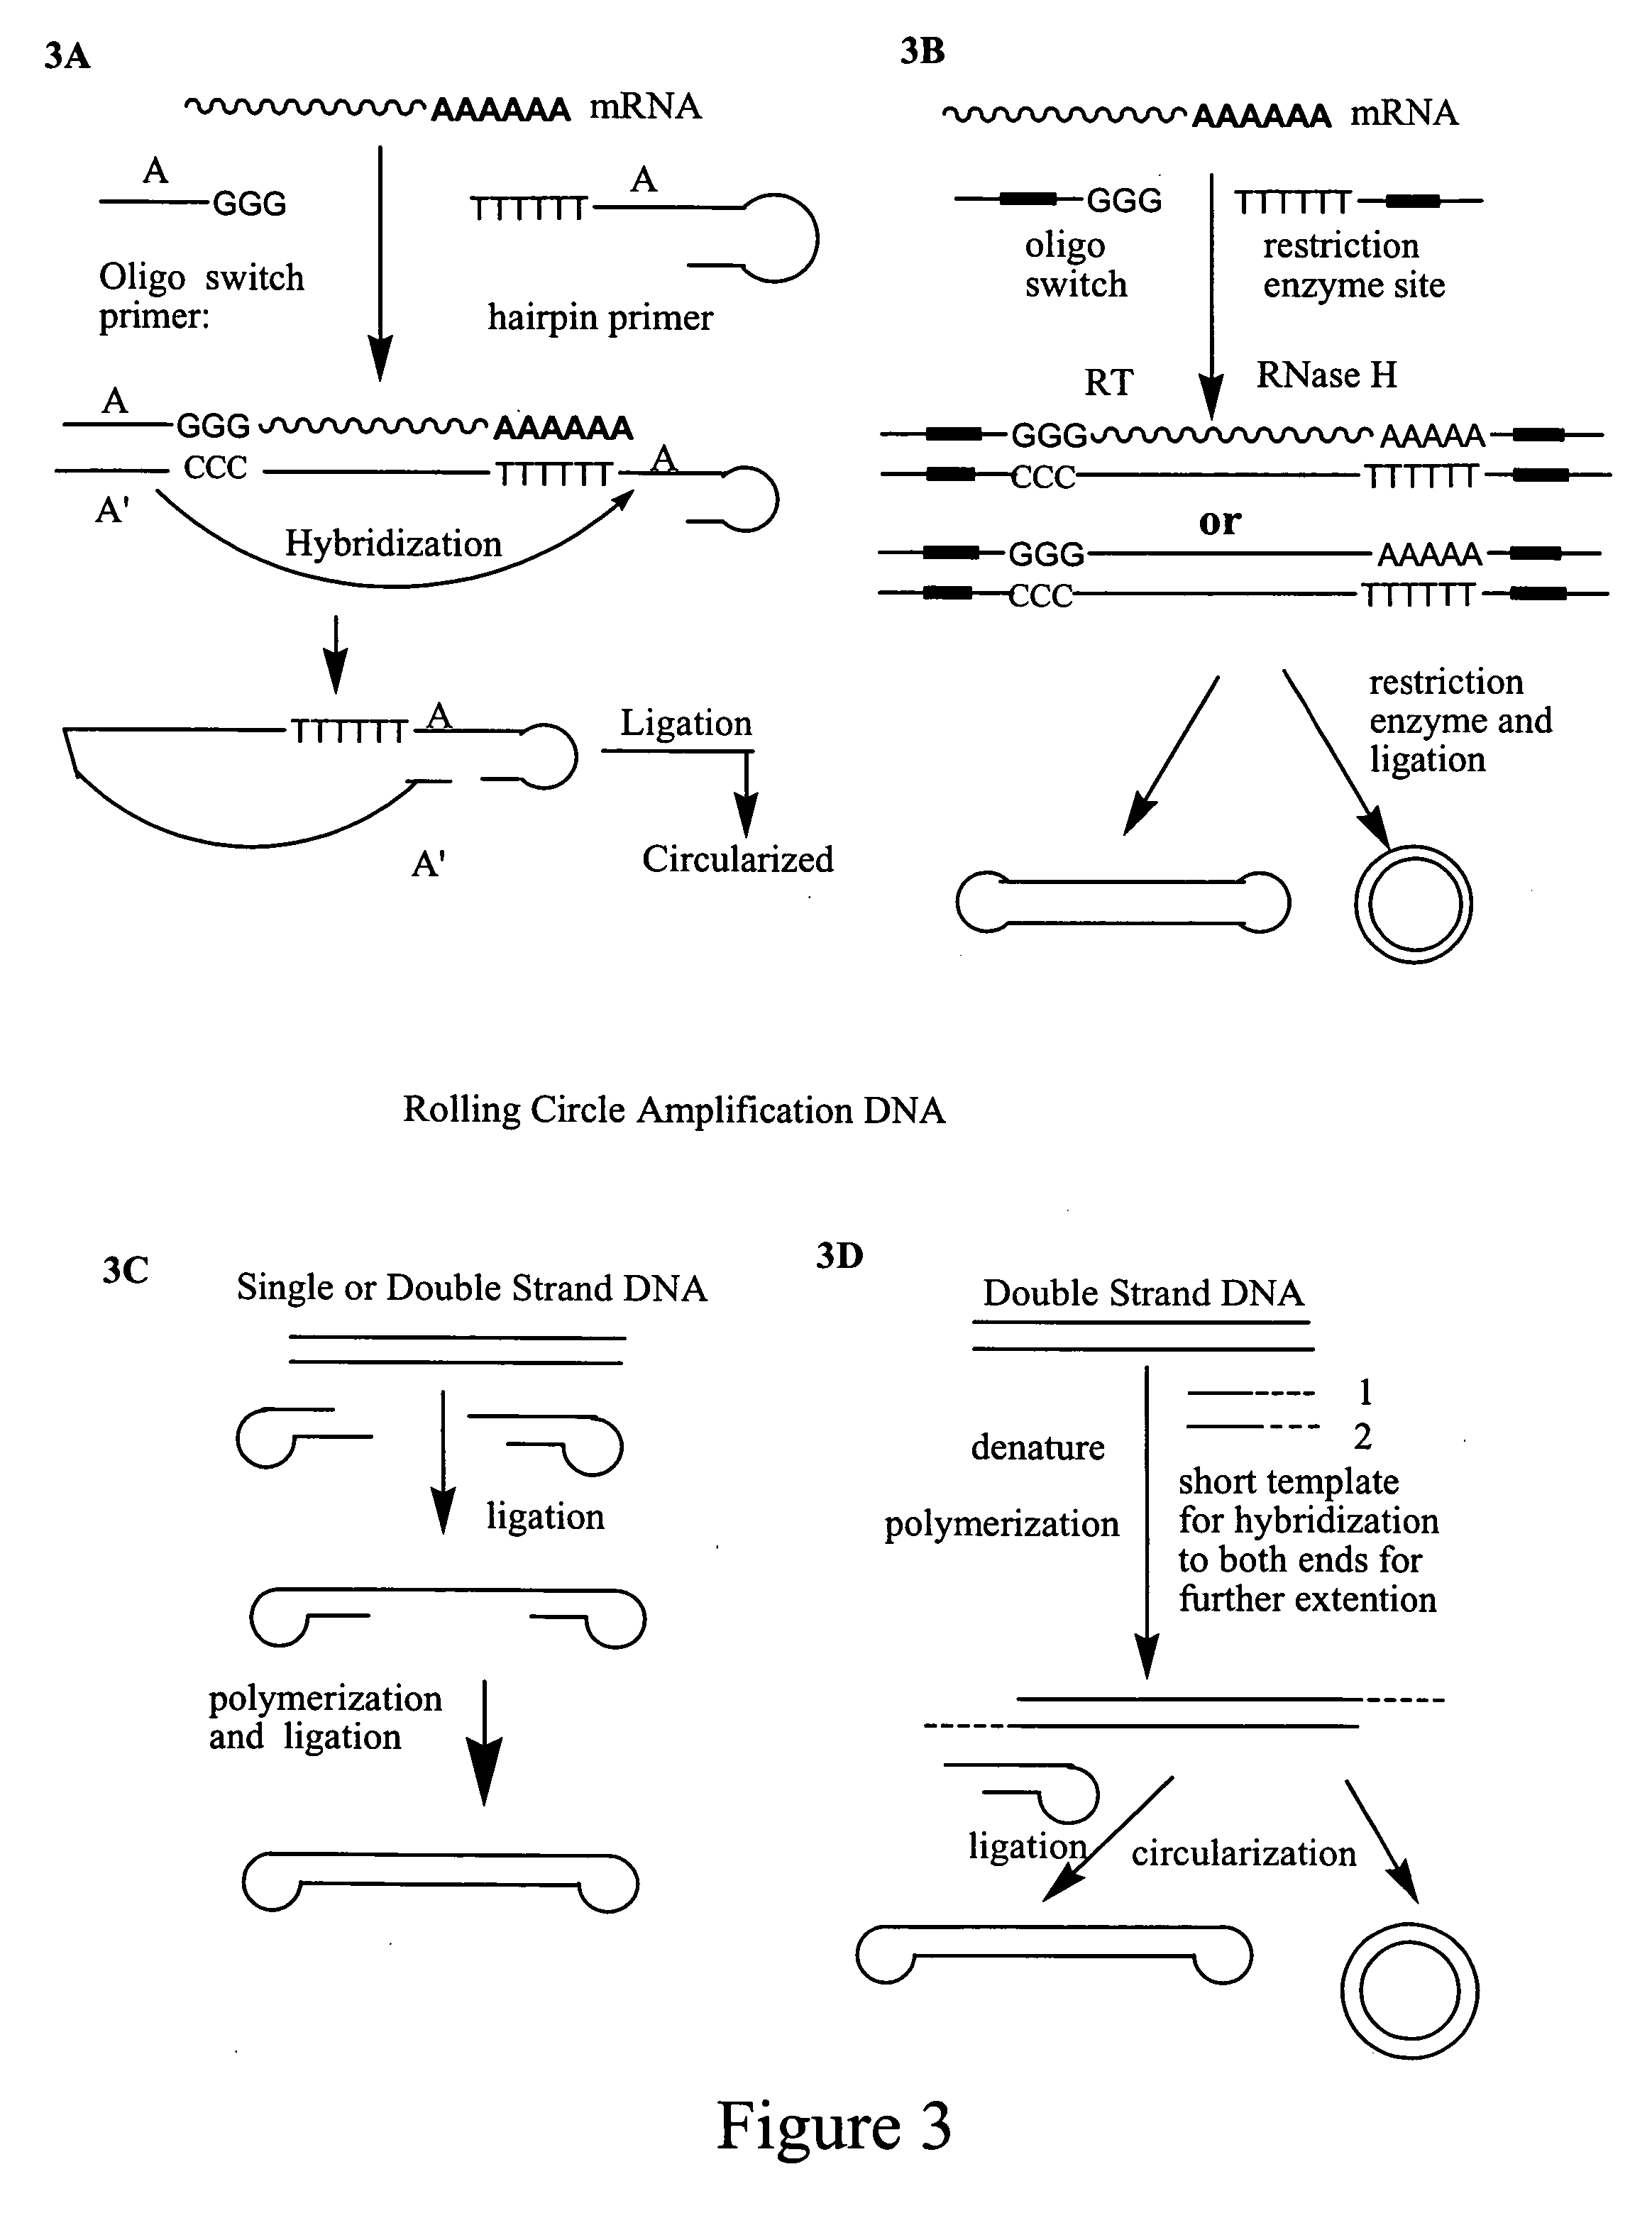 Amplification of polynucleotides by rolling circle amplification